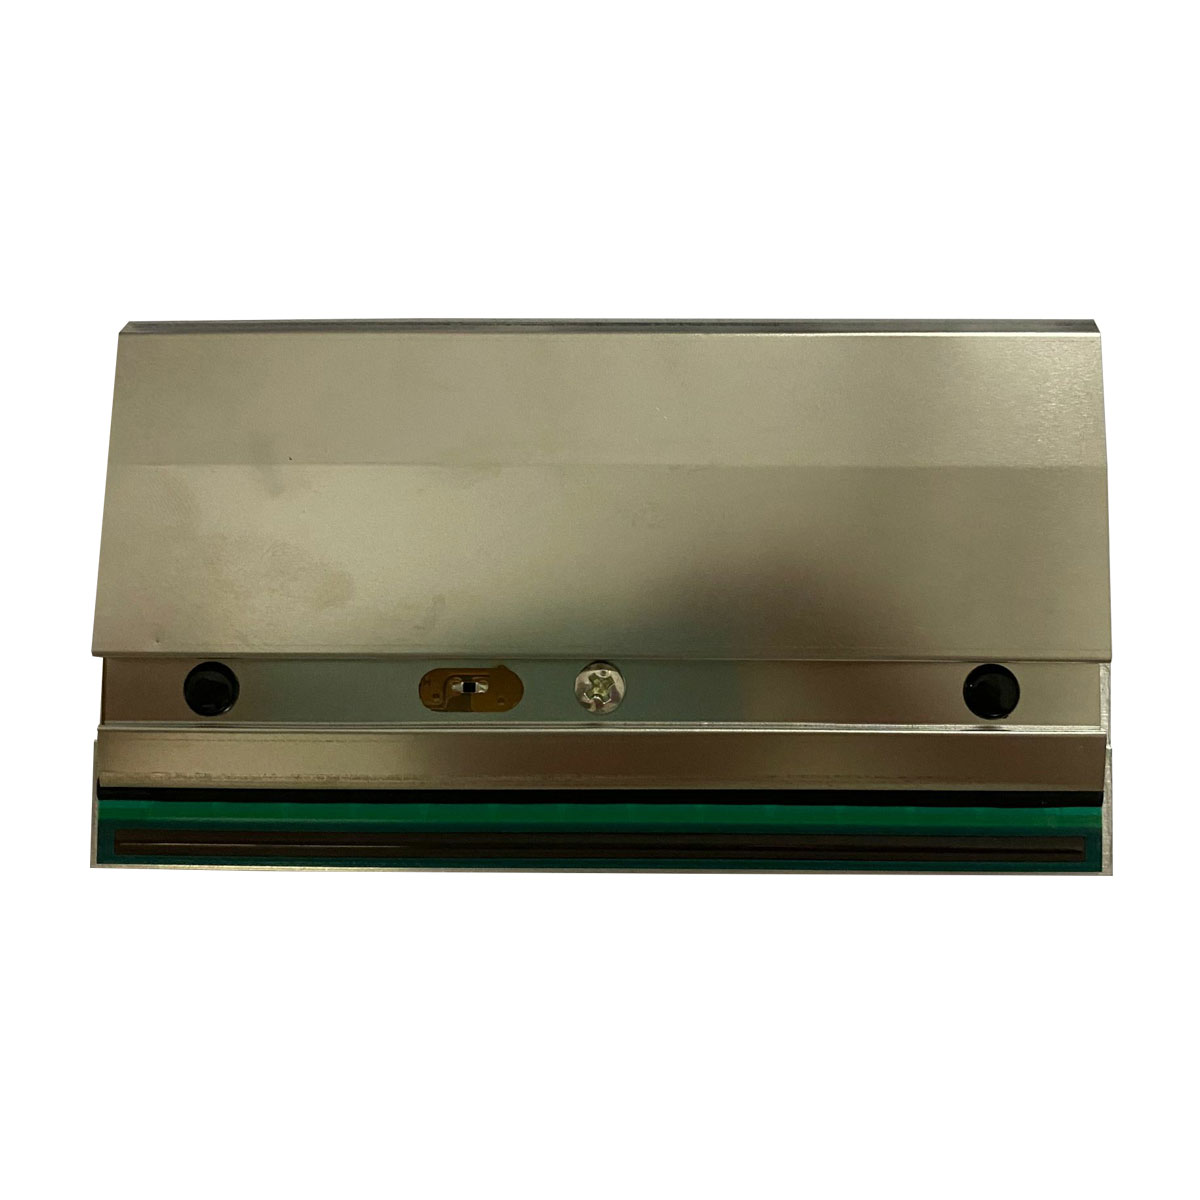 New compatible printhead for TSC TTP-2410M - Click Image to Close